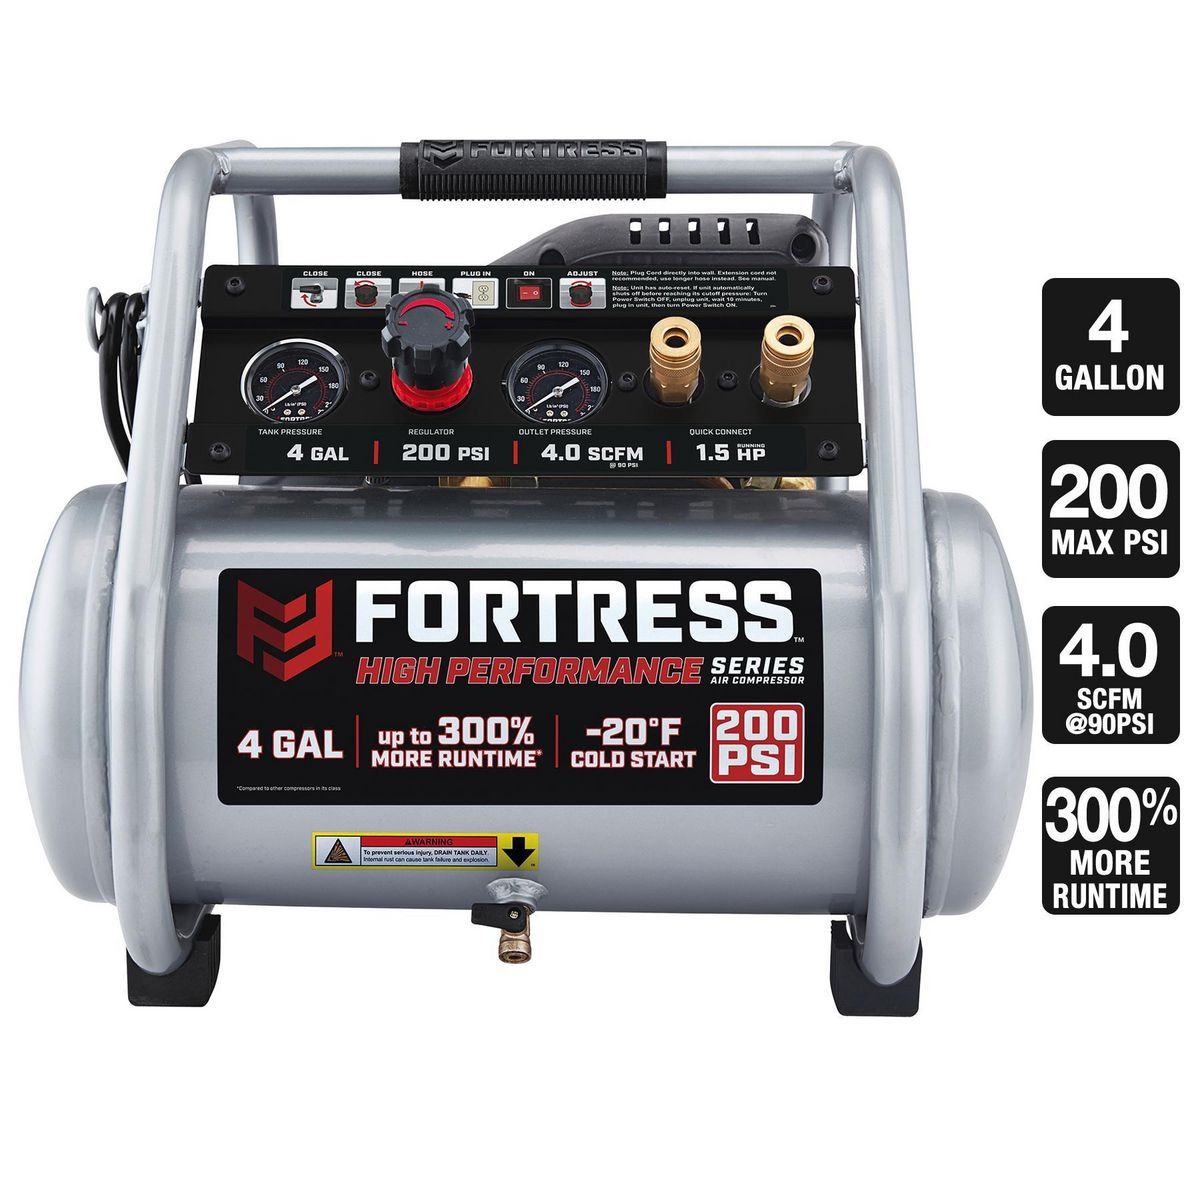 FORTRESS 4 Gallon 200 PSI High Performance Hand Carry Jobsite Air Compressor